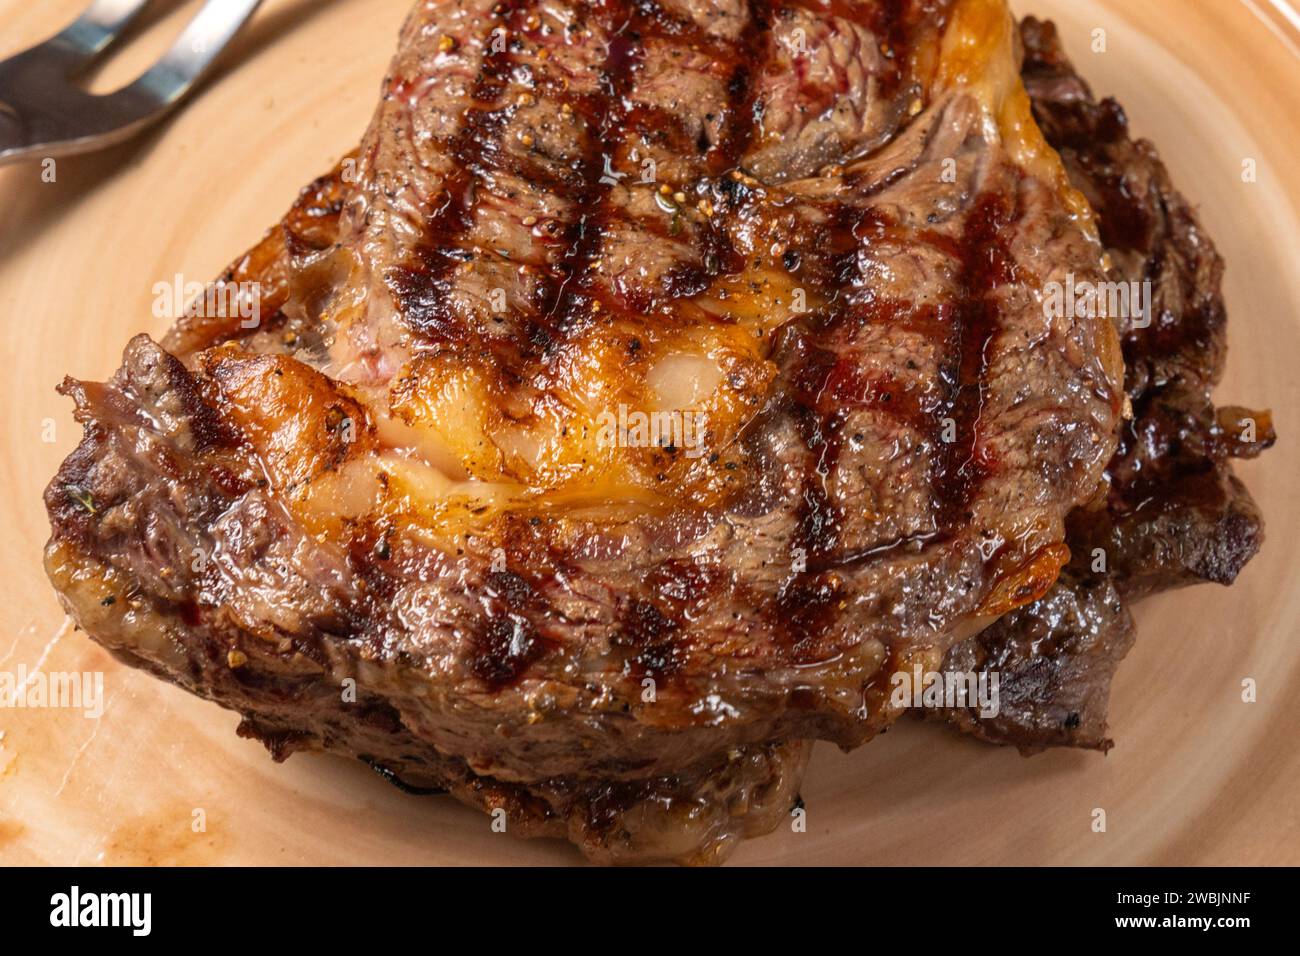 Succulent Grilled Steak on a Plate Captured. Selective focus Stock Photo